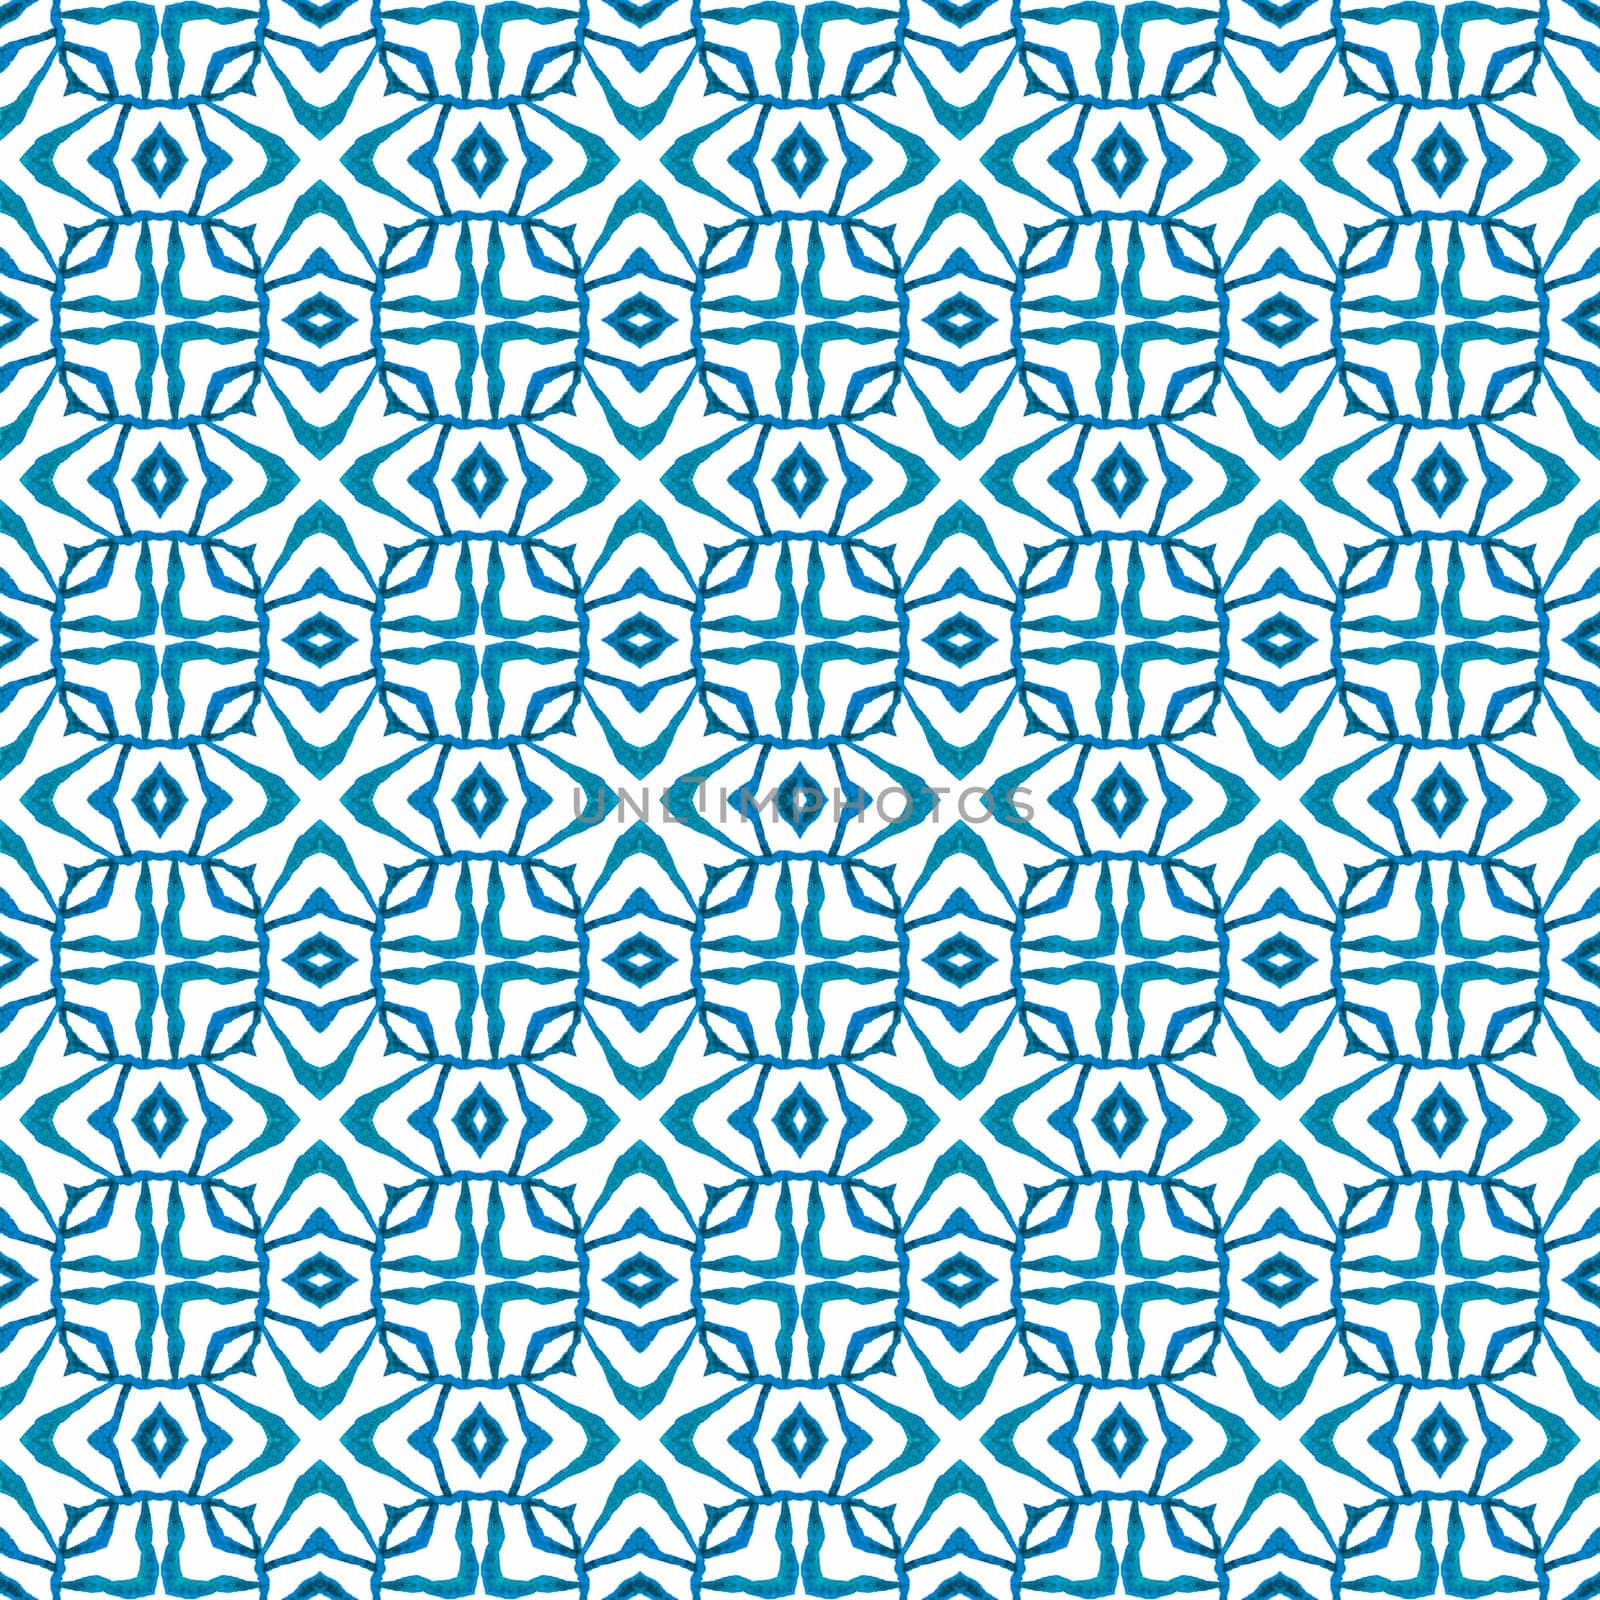 Repeating striped hand drawn border. Blue by beginagain